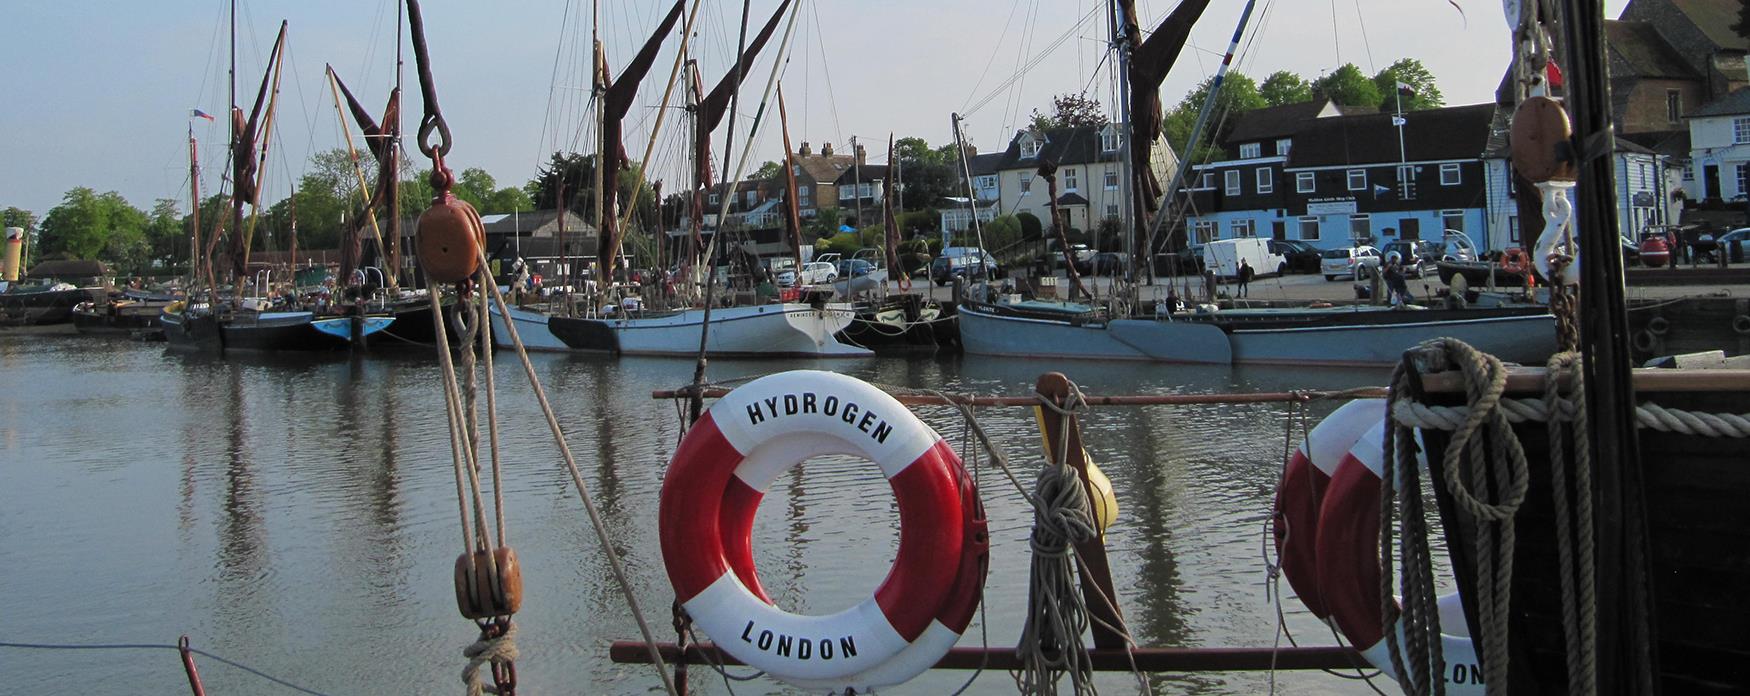 A view of Hythe Quay from the deck of Thames Sailing Barge 'Hydrogen'